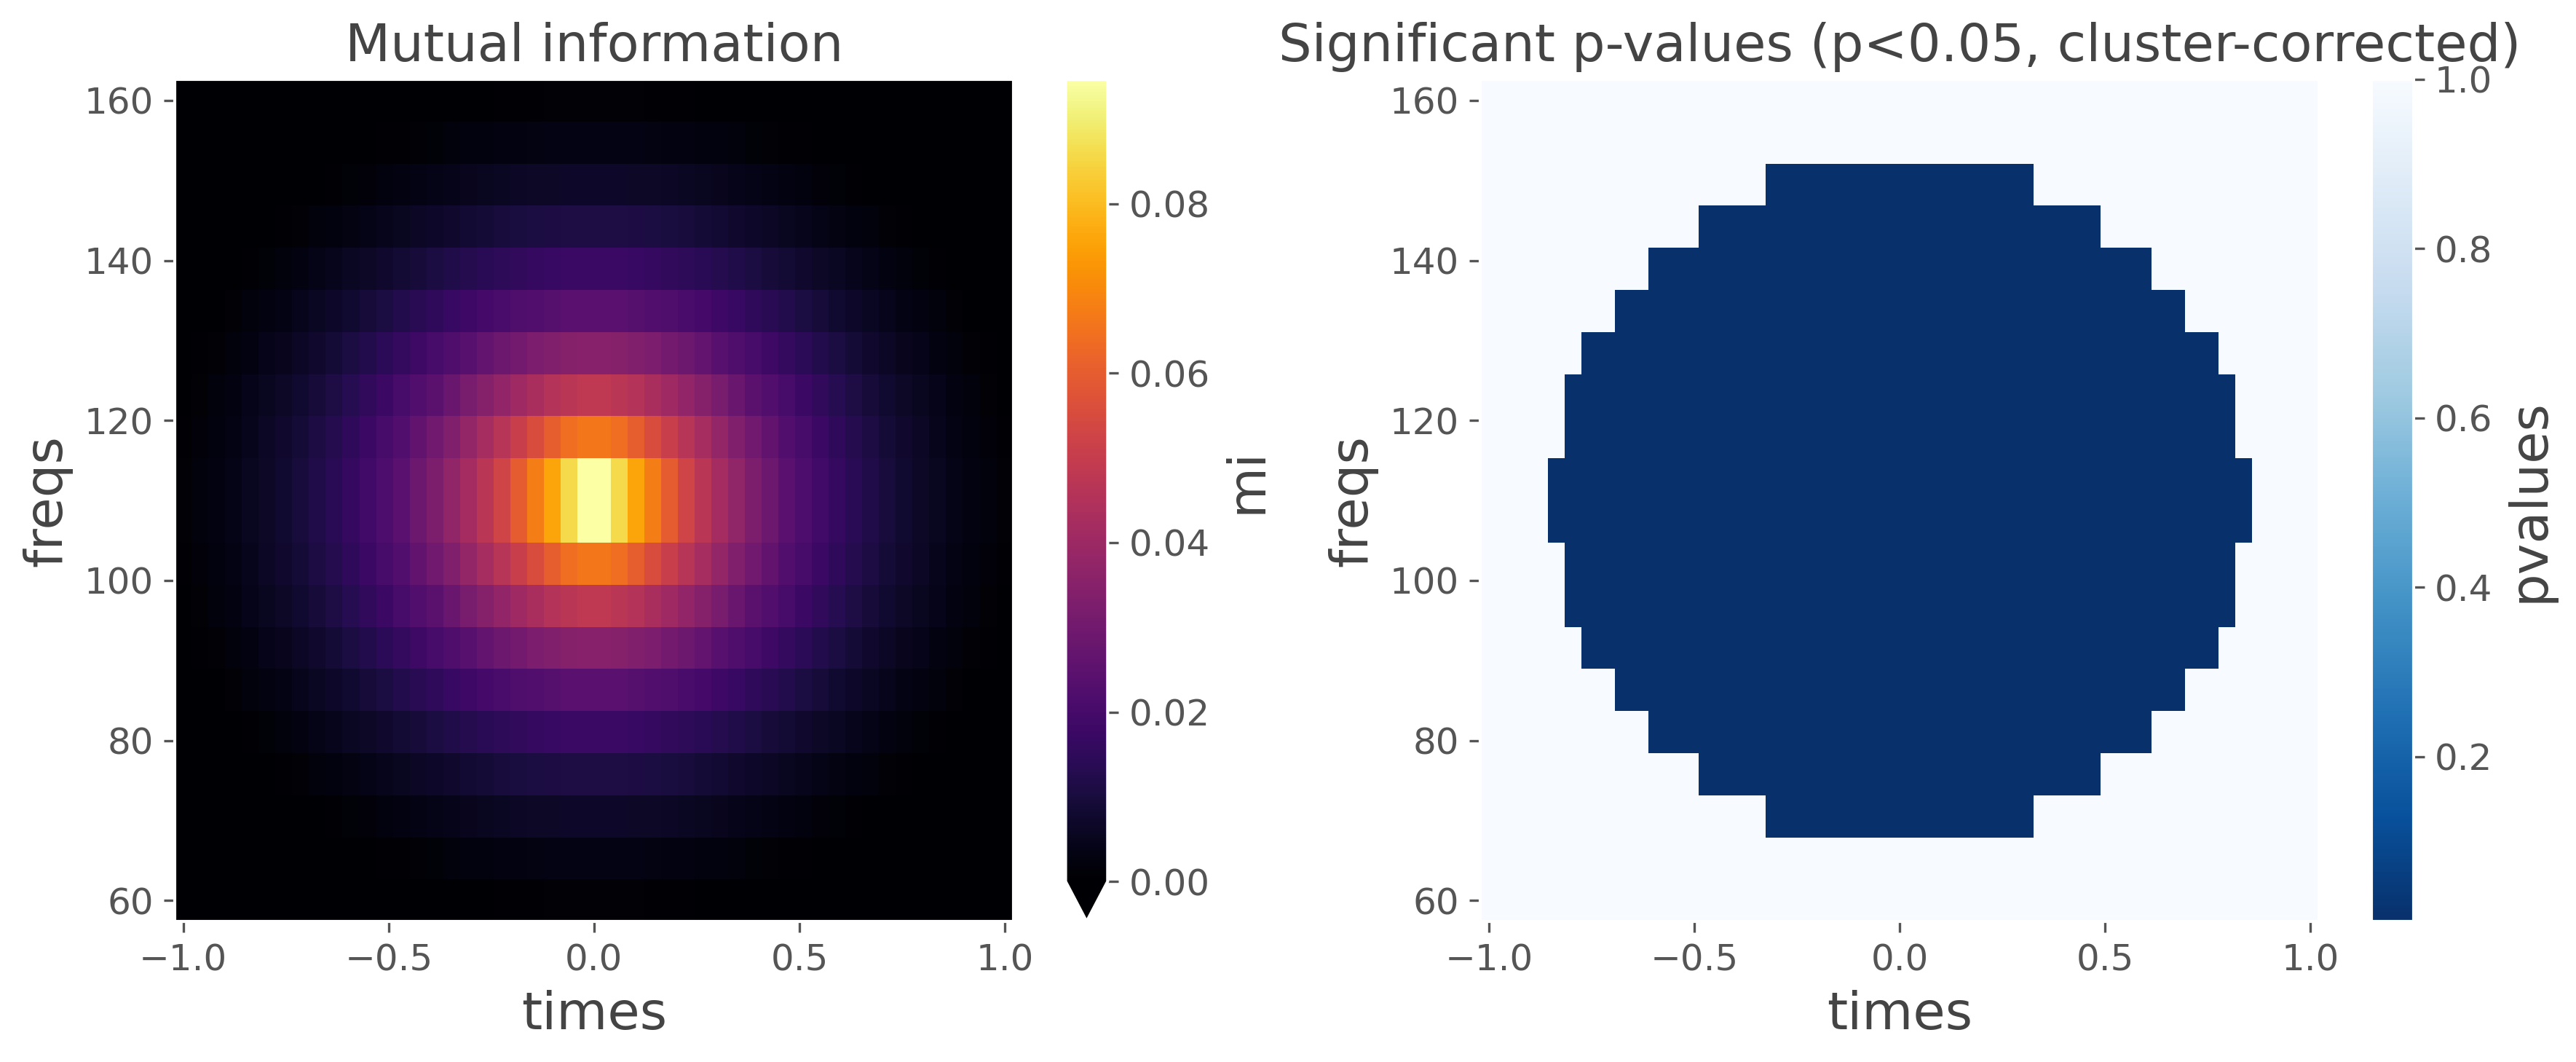 Mutual information, Significant p-values (p<0.05, cluster-corrected)